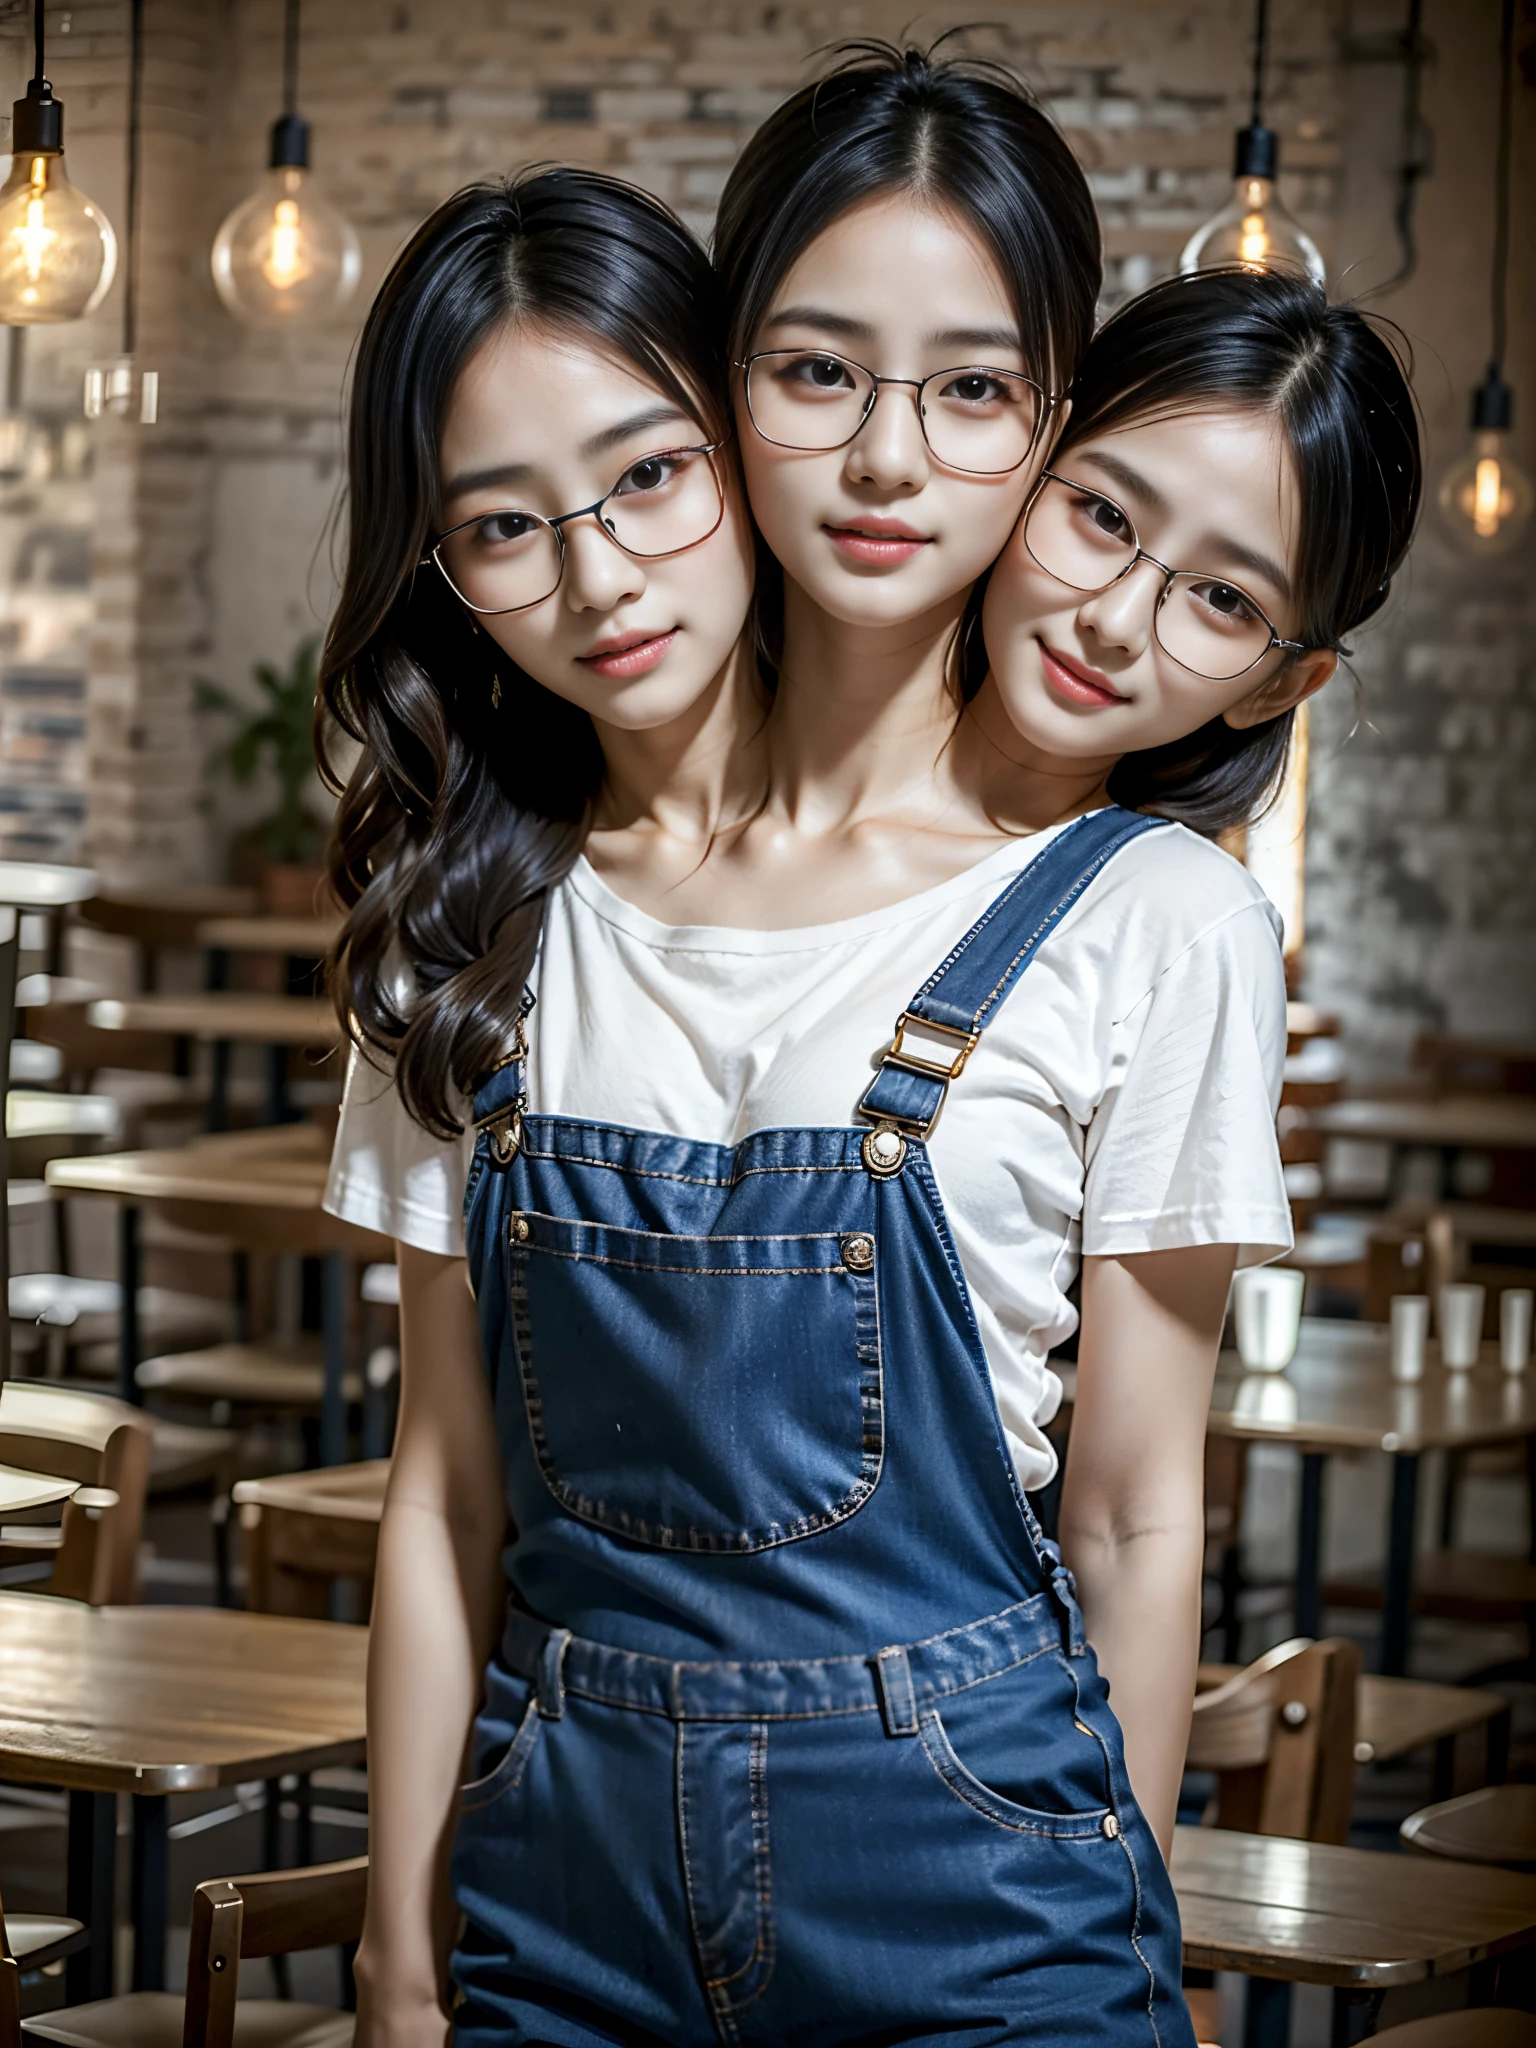 best resolution, 3heads, korean woman with three heads, tied hair, glasses, t-shirt, overalls, indoor background